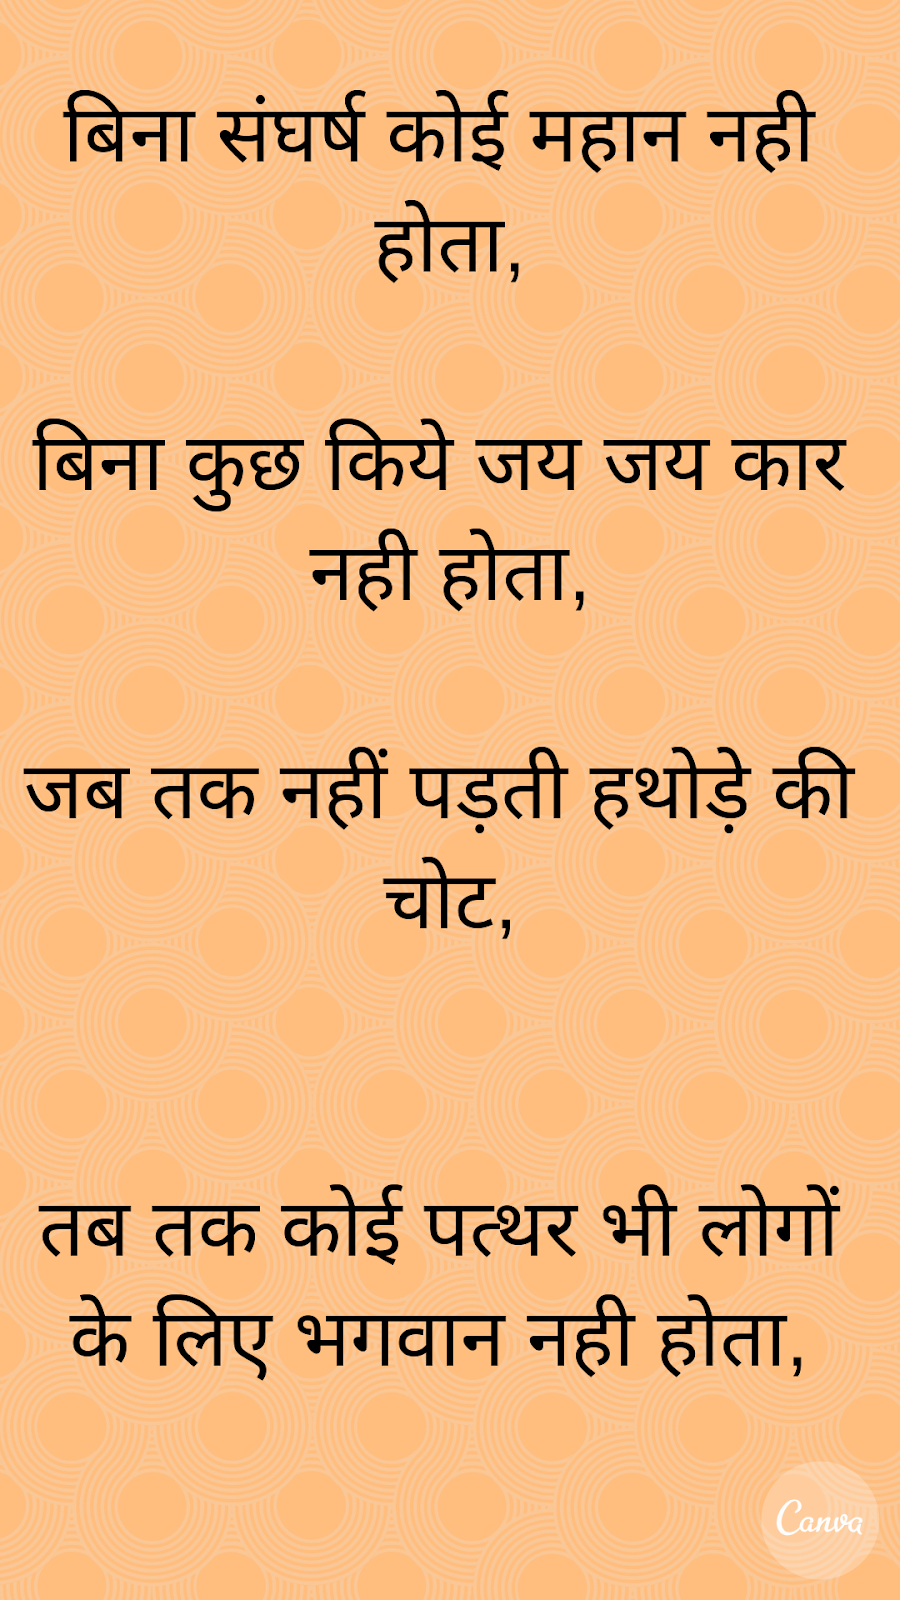 Motivational Quotes For Ca Students In Hindi Motivational Quotes